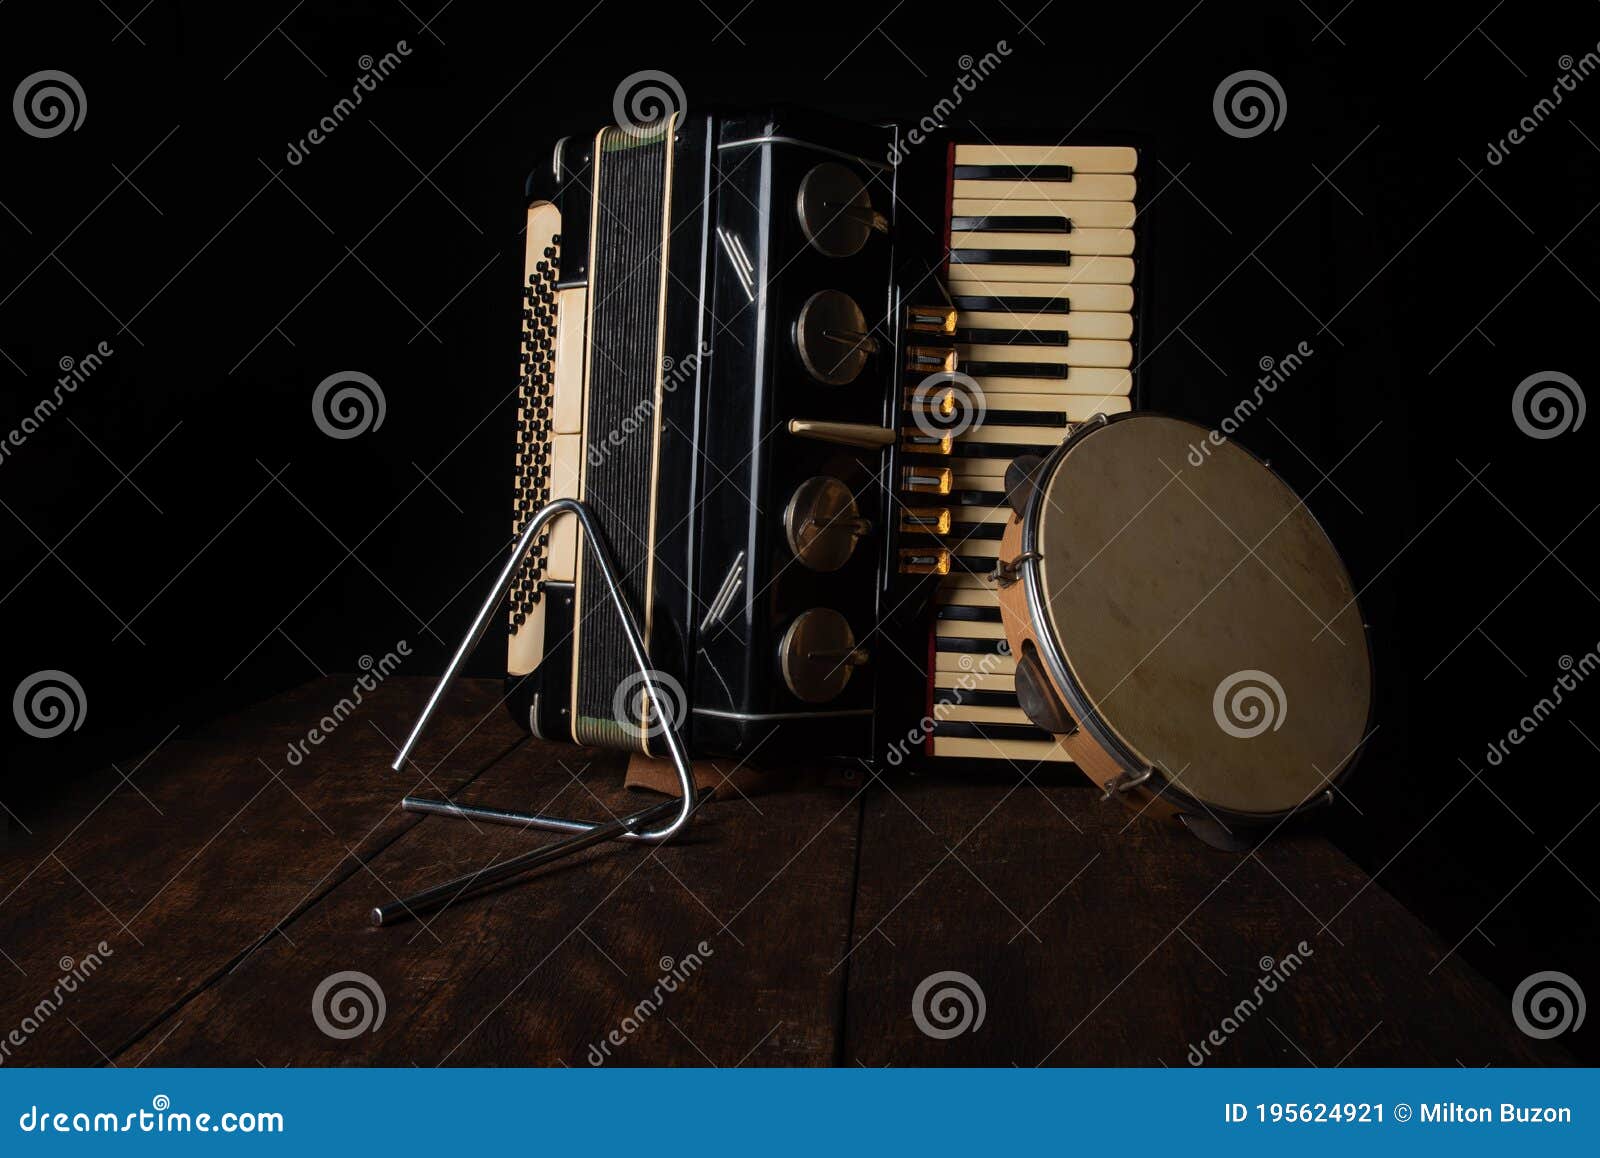 old accordion, tambourine and triangle on rustic wooden surface with black background and low key lighting, selective focus